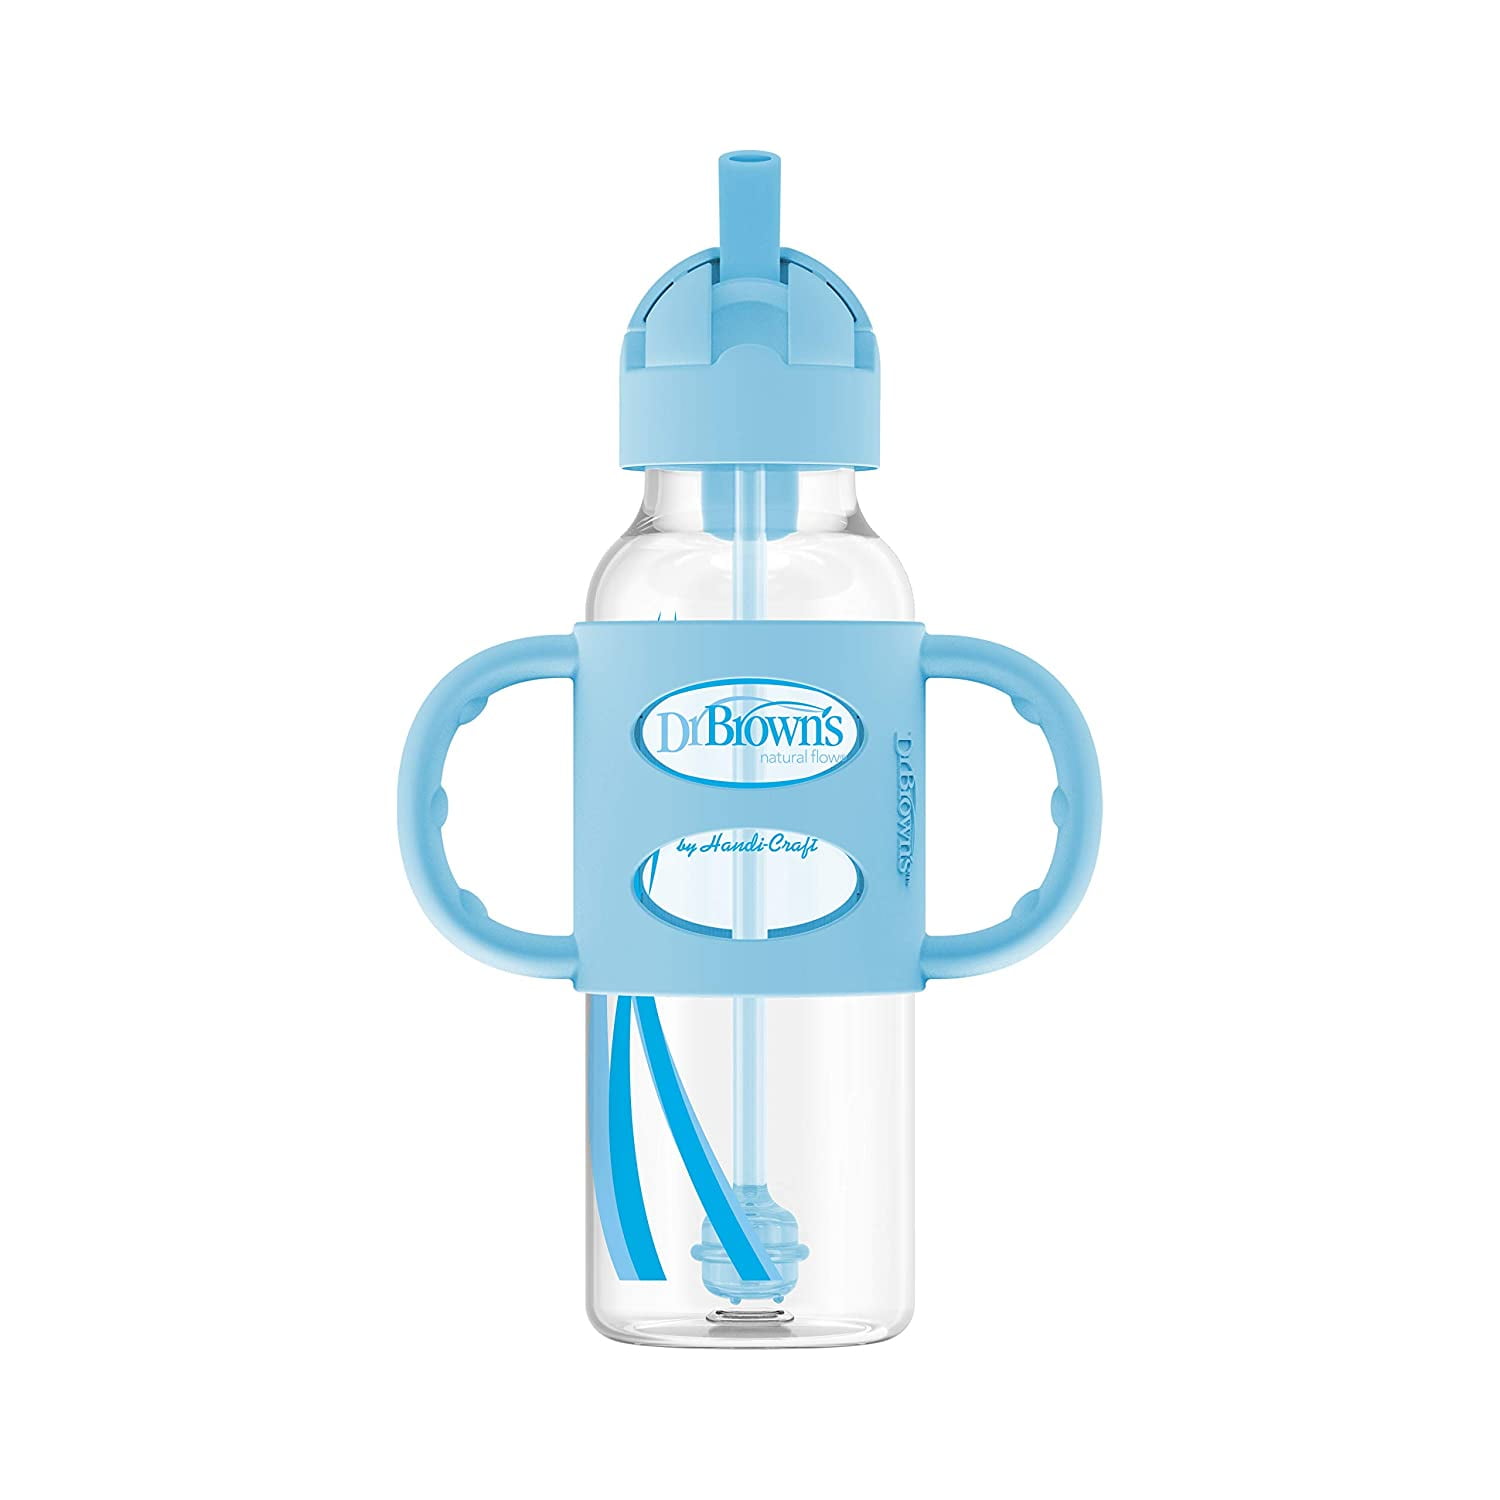 3pcs Silicone Replacement Straws Accessory for Kids Water Bottle and Baby Sippy Cup, 6.89 inch Long, Clear